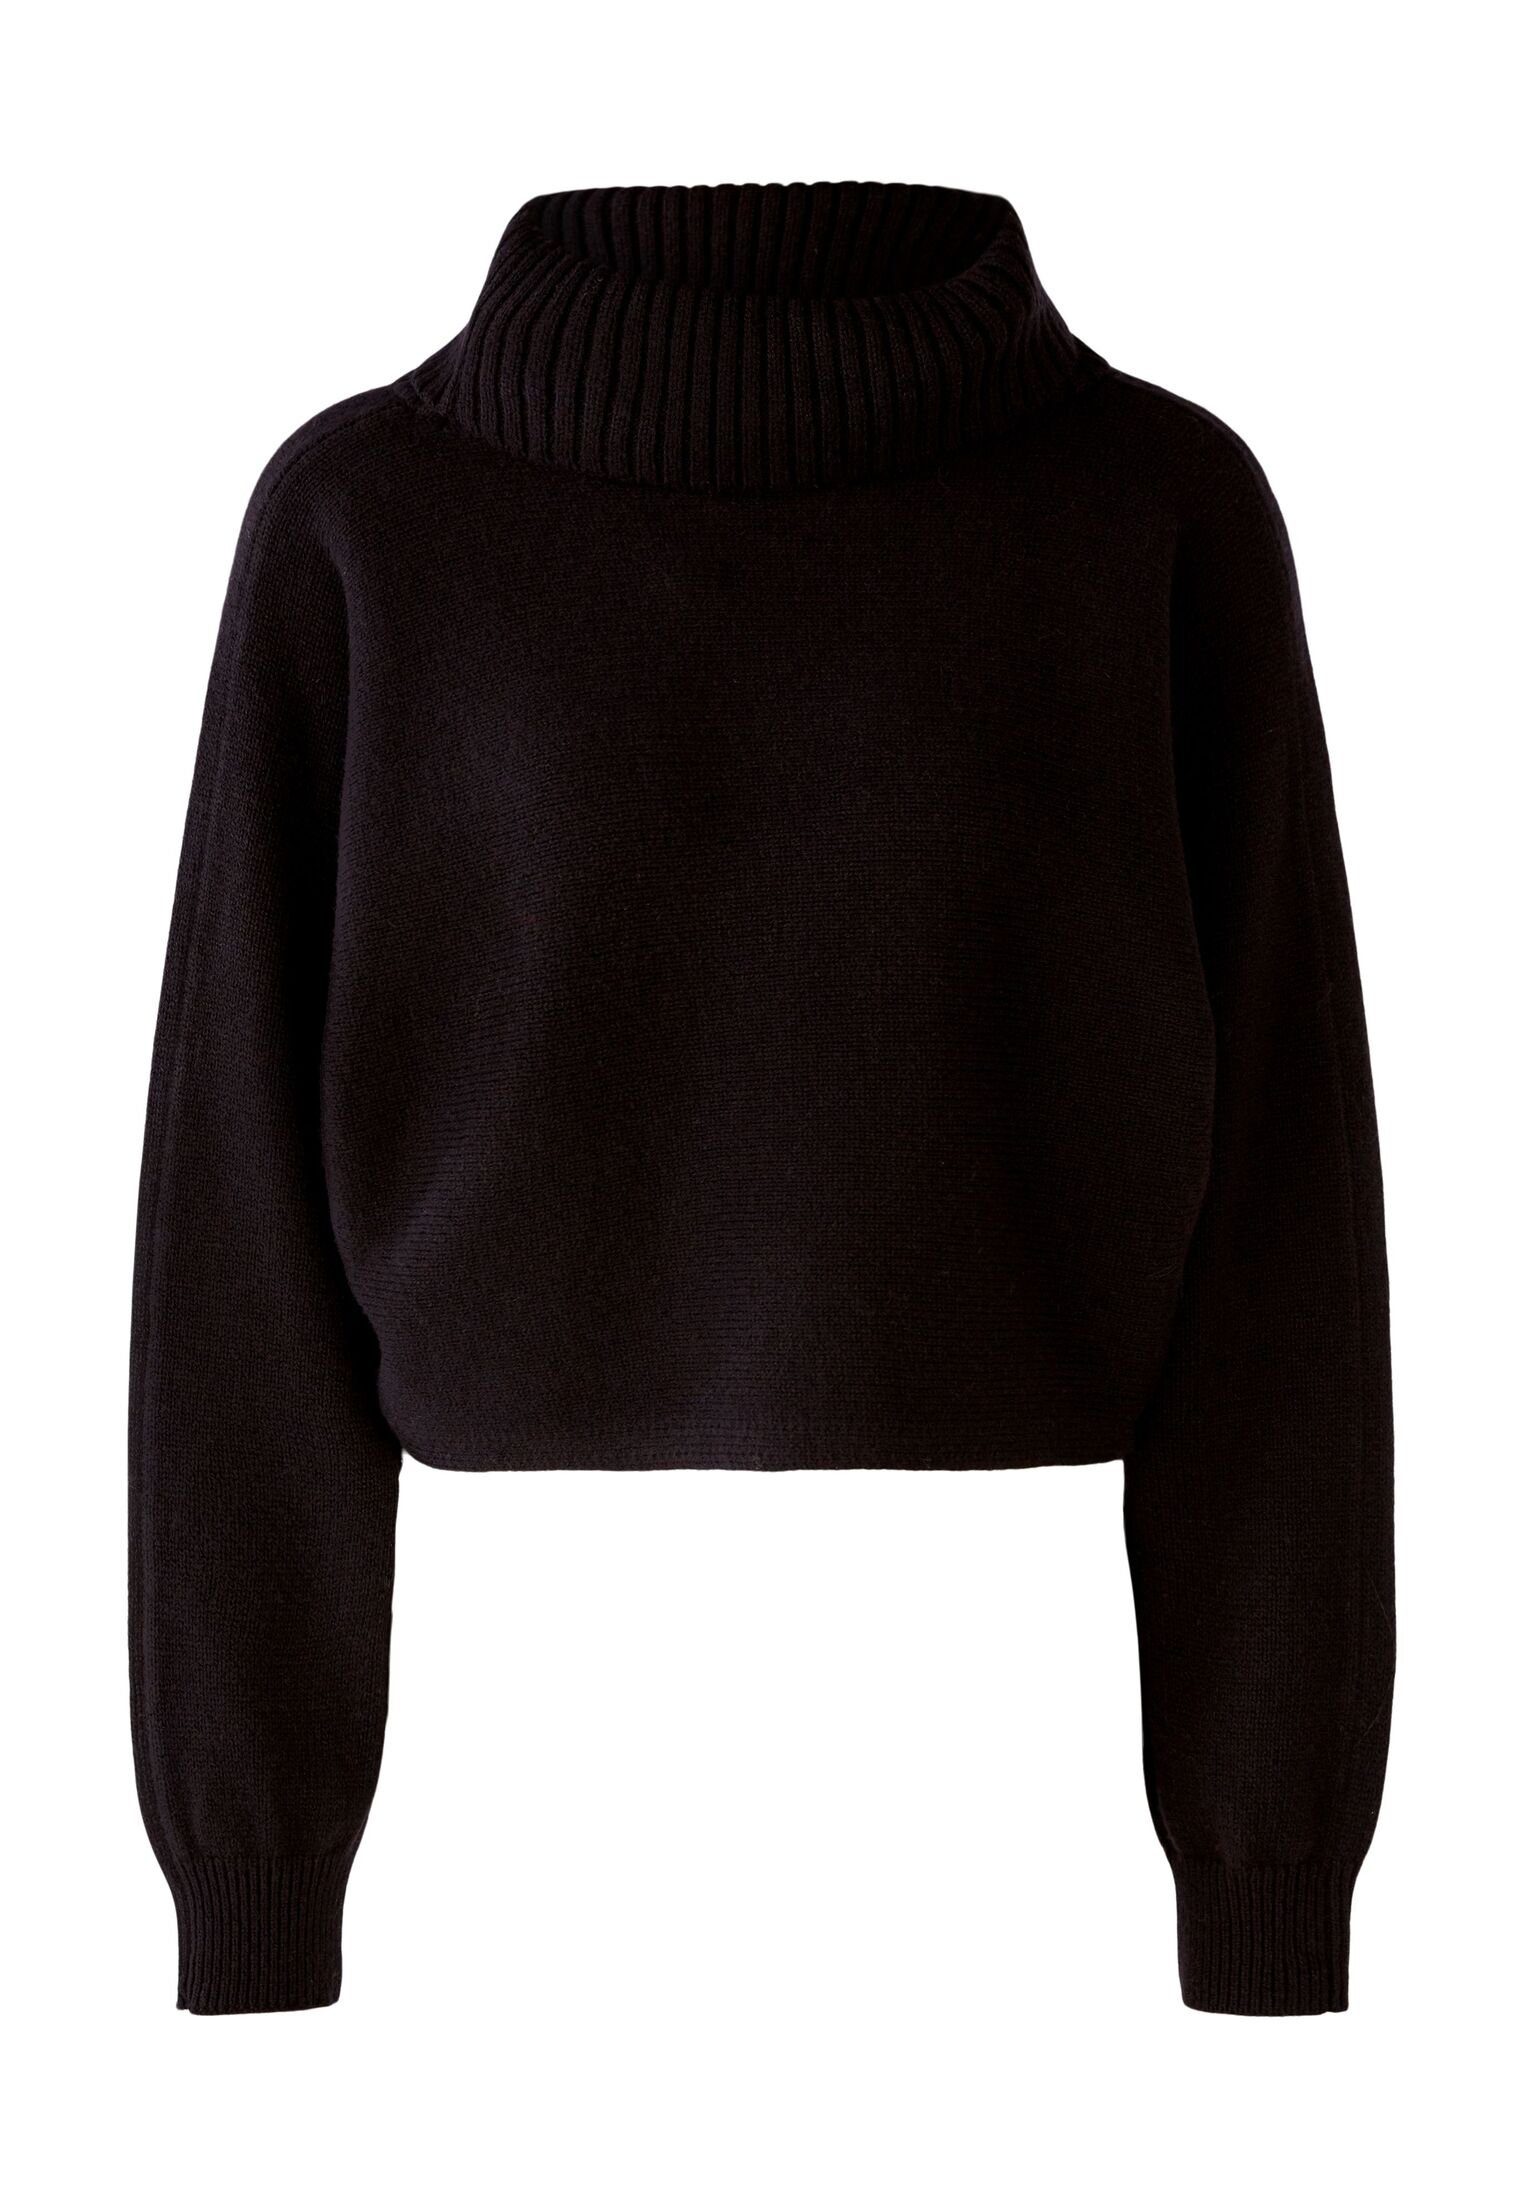 Oui Wollmischung Pullover black Strickpullover